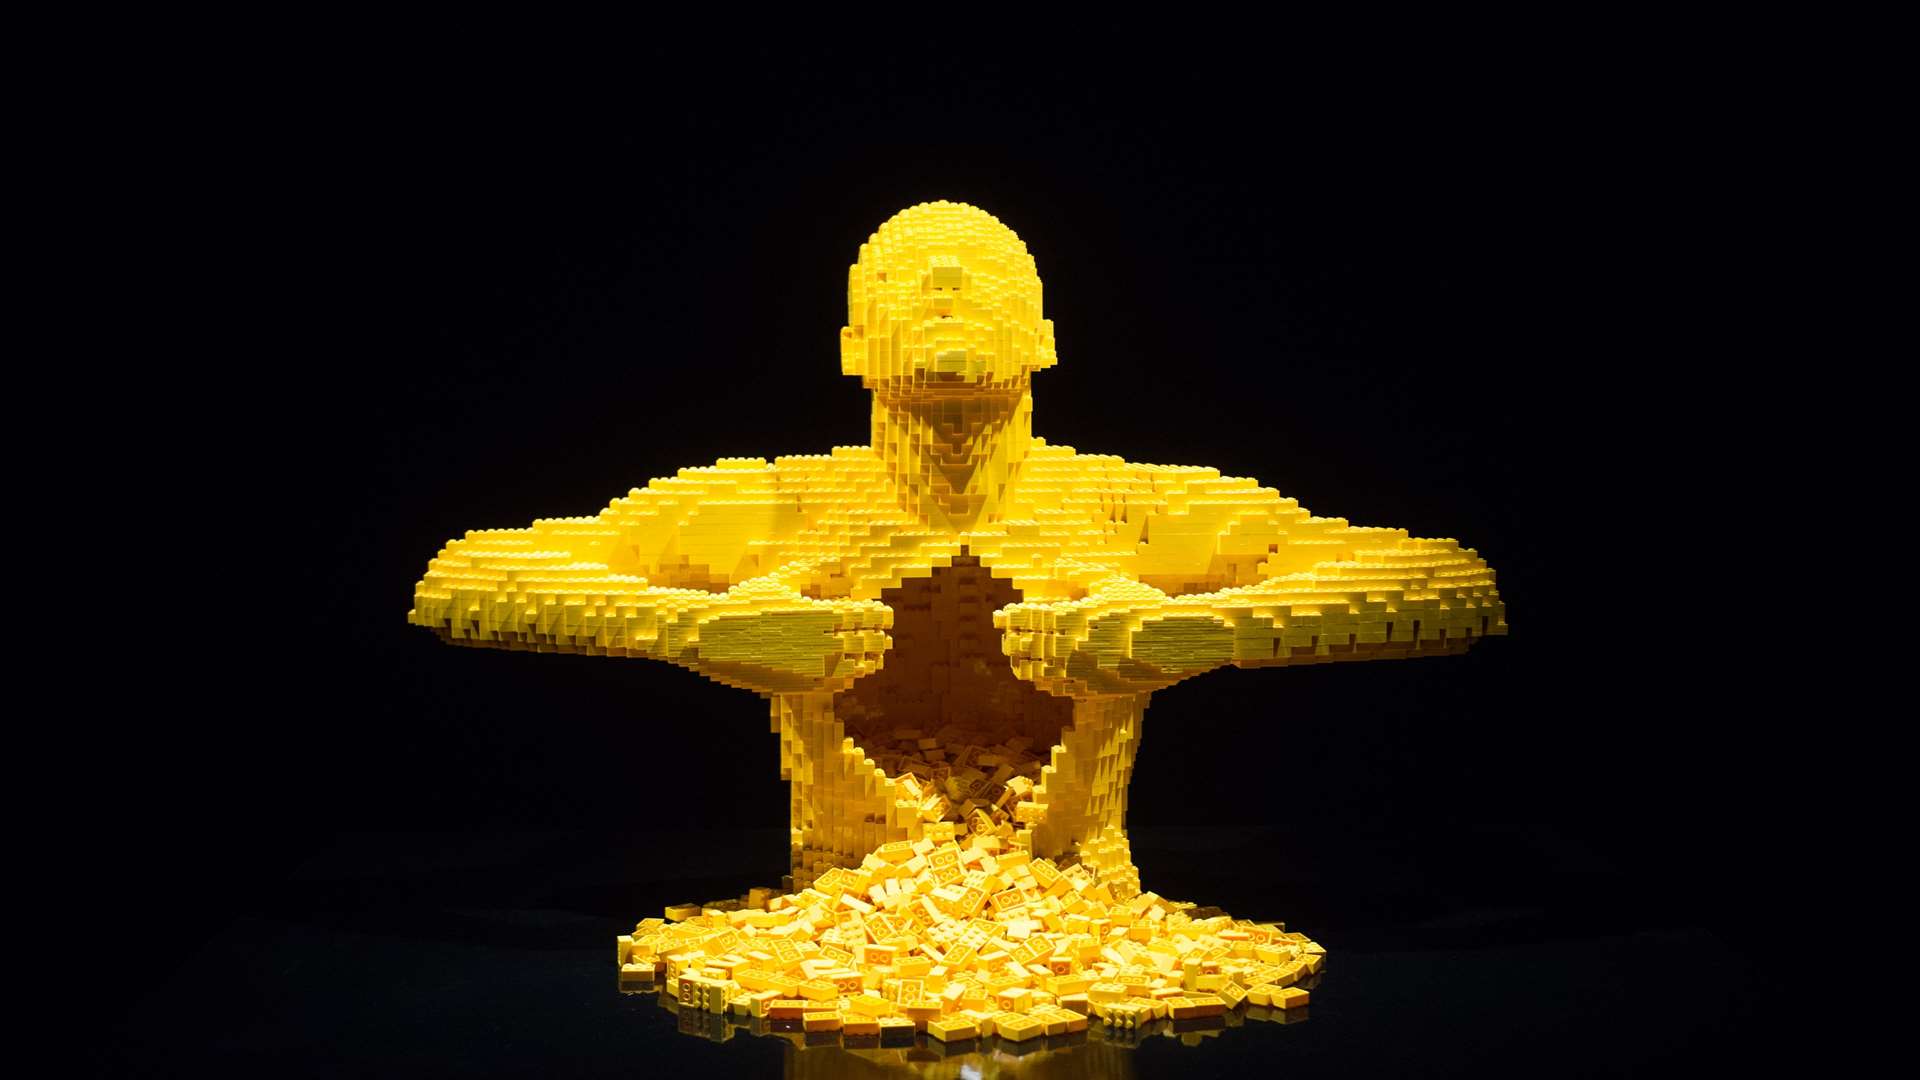 LEGO sculpture by Nathan Sawaya. Photo by Jane Hobson.